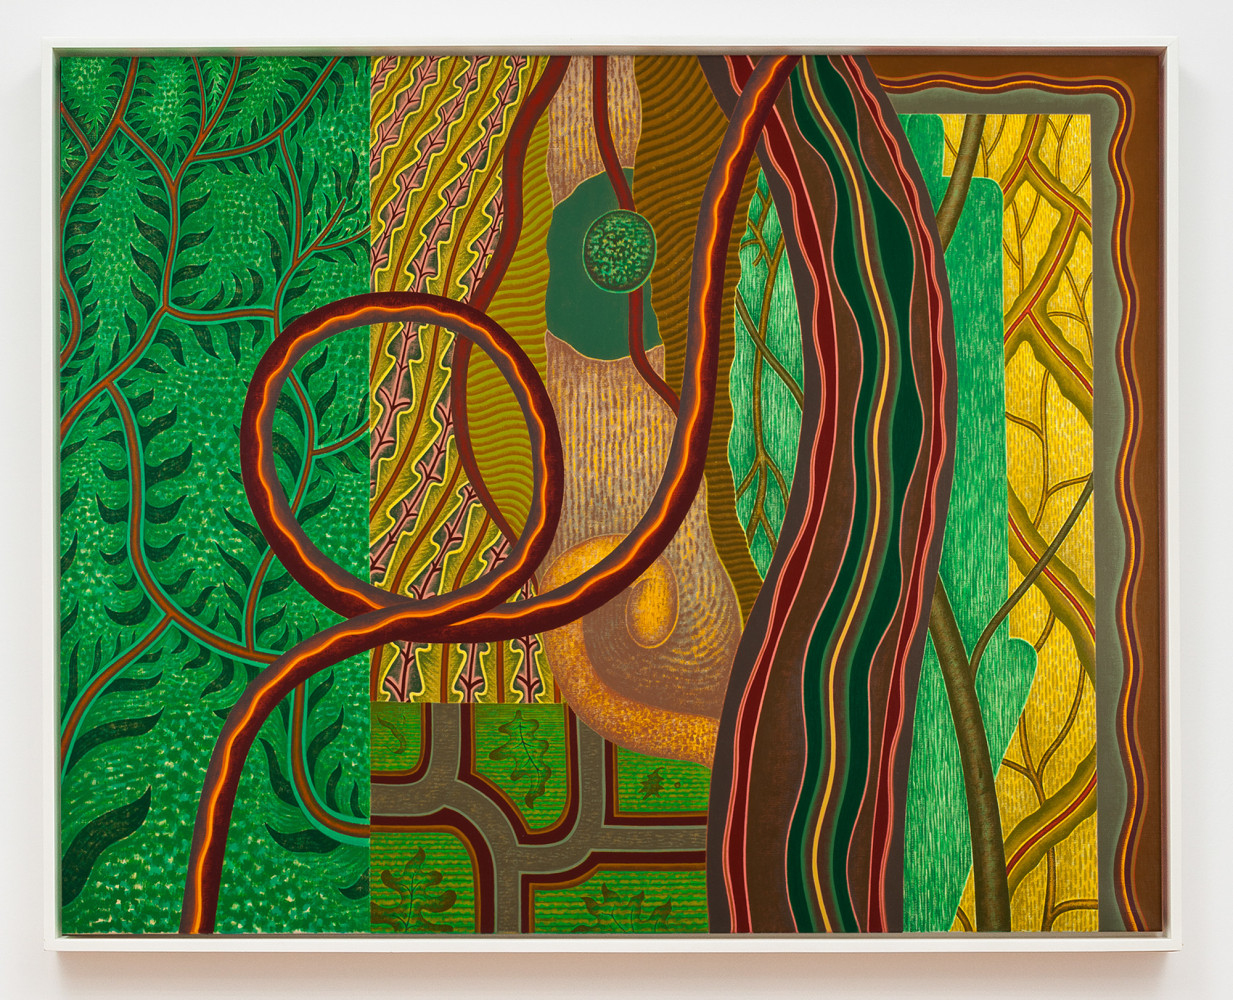 Sassacricket High, 1987
Oil on linen
39 3/4 &amp;times; 50 inches
(101&amp;nbsp;&amp;times; 127 cm)